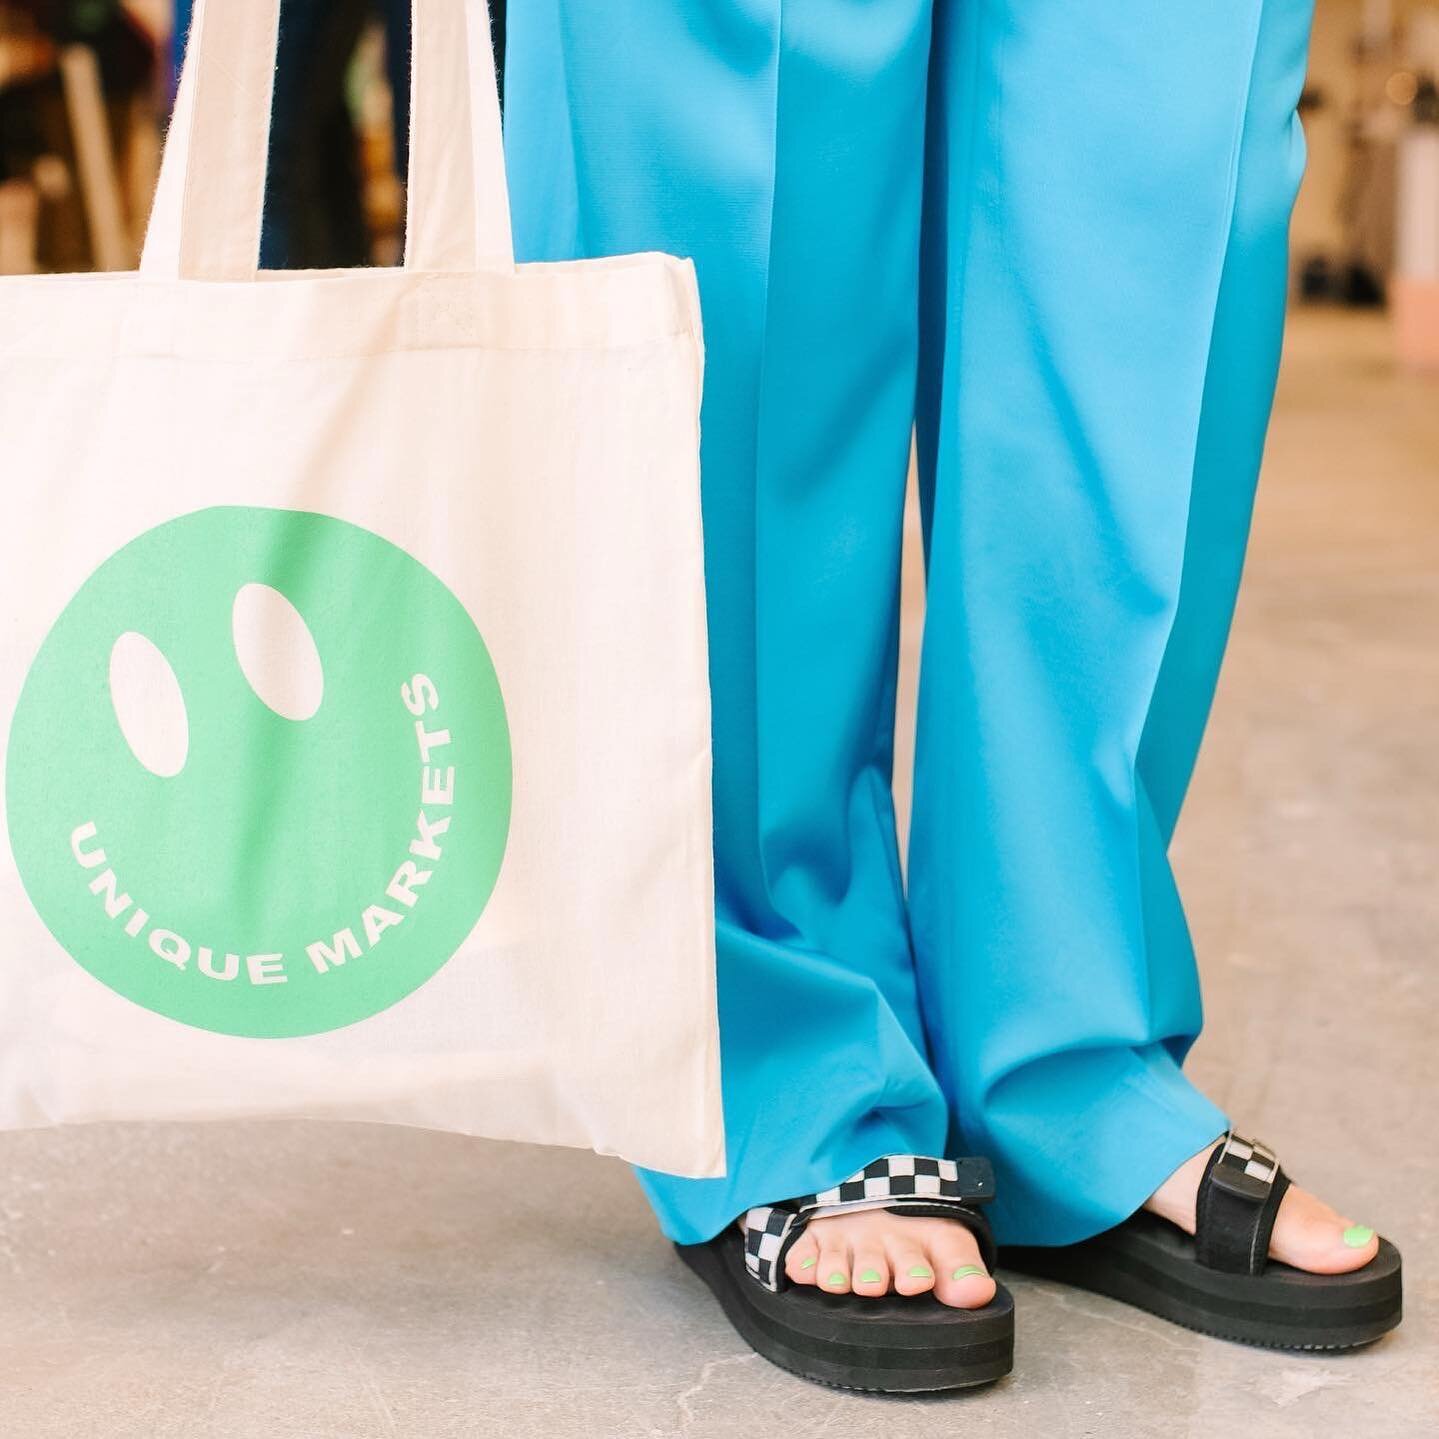 🤩 Snag our free bag! The Spring totes are C-U-T-E AF and double sided&hellip; get yours this wknd in DC!

#uniquemarketsdc #shoplocal #shopsmall #madeindc